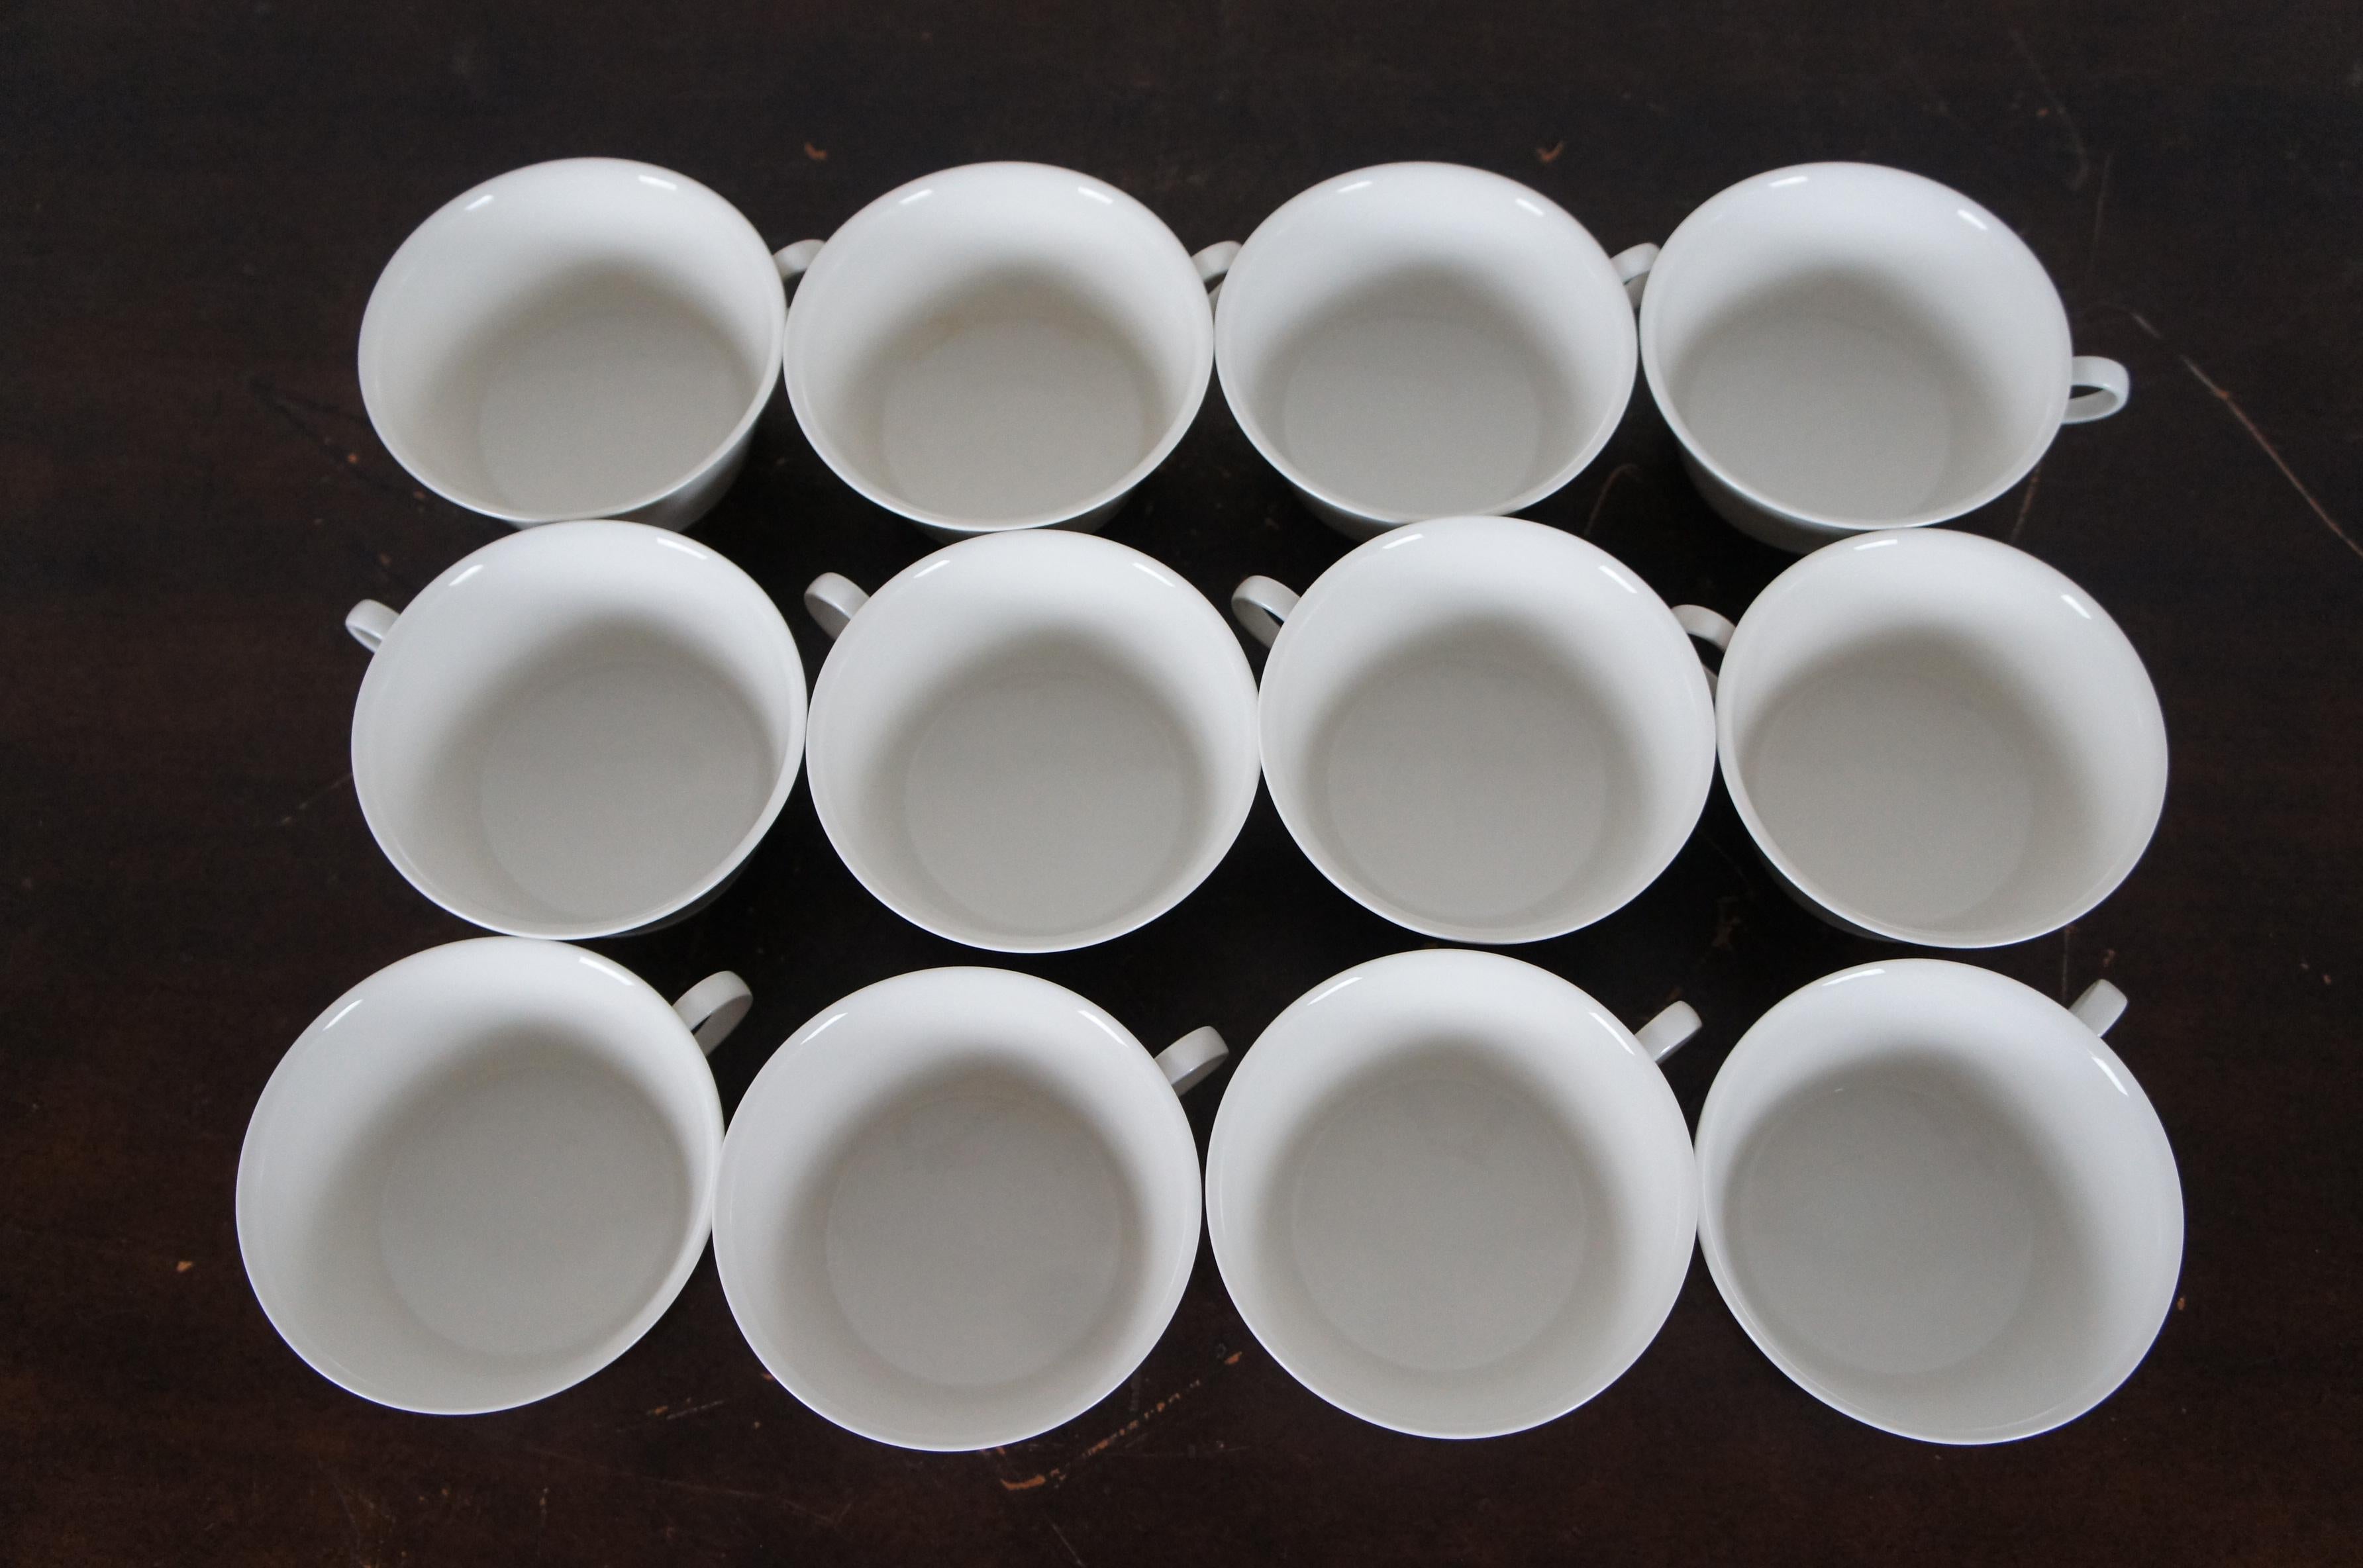 12 Antique Berlin Kpm Arkadia Urania White Porcelain Tea Coffee Cups & Case In Good Condition For Sale In Dayton, OH